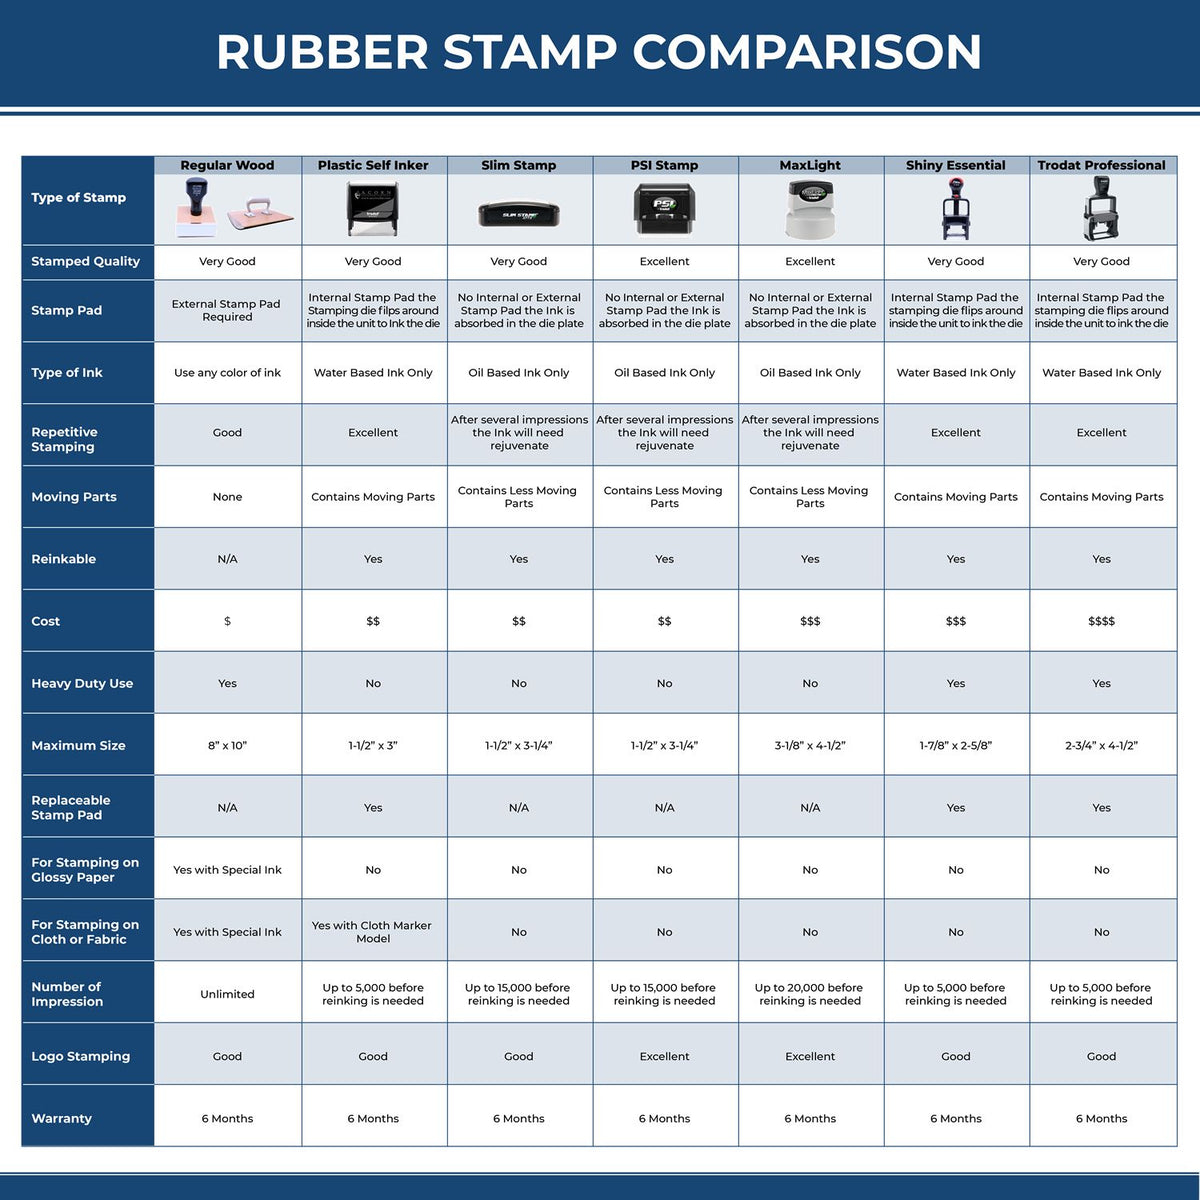 Xstamper Engineering Geologist Pre-Inked Rubber Stamp of Seal 3038ENGEO Rubber Stamp Comparison